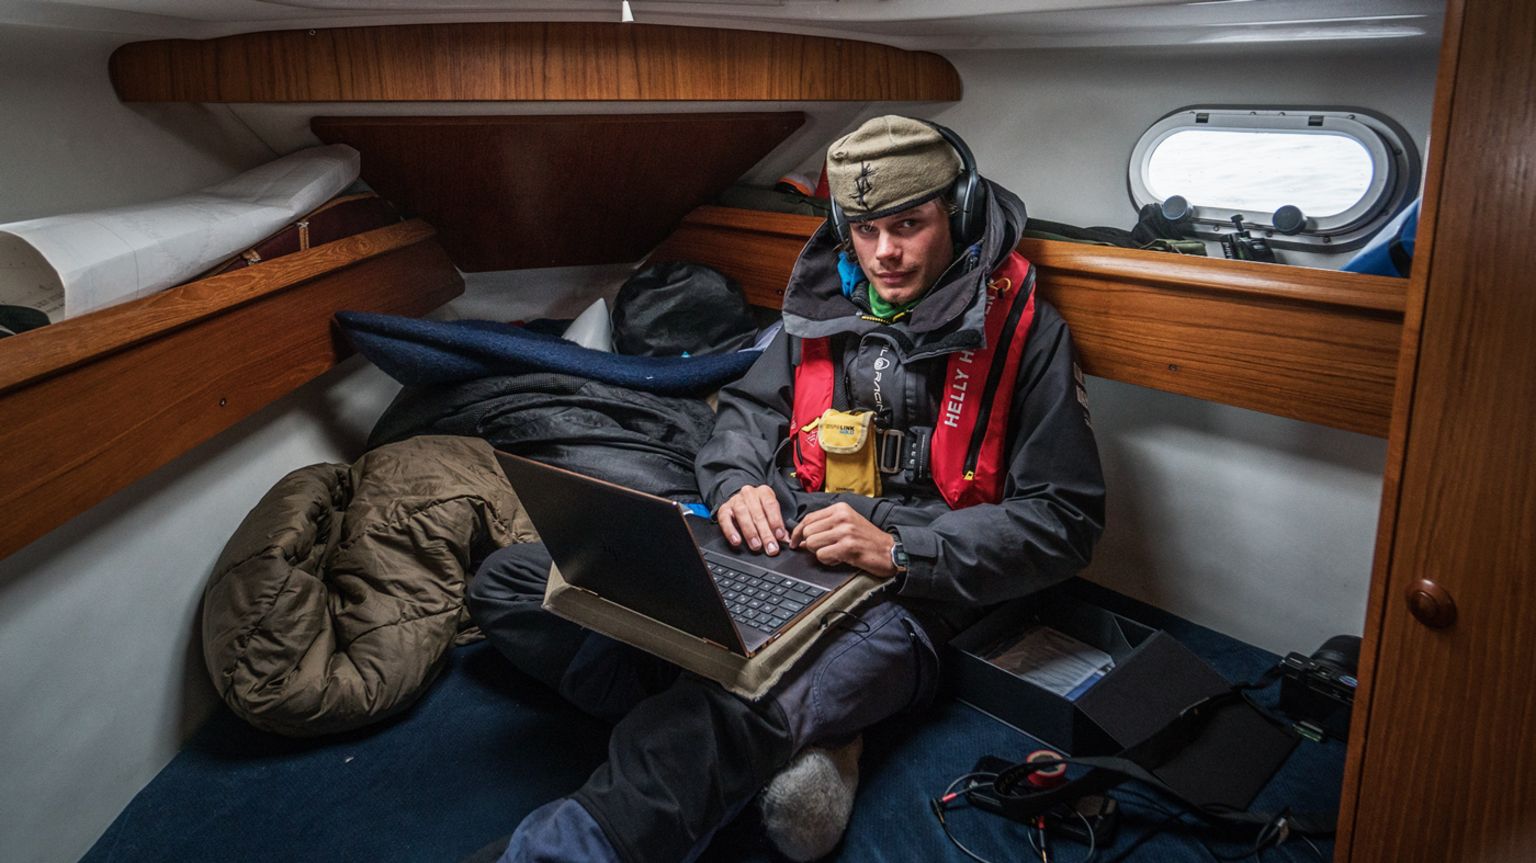 Sigurd Toven Gautun on a Nature and Youth expedition to Bear Island, Norway in 2018